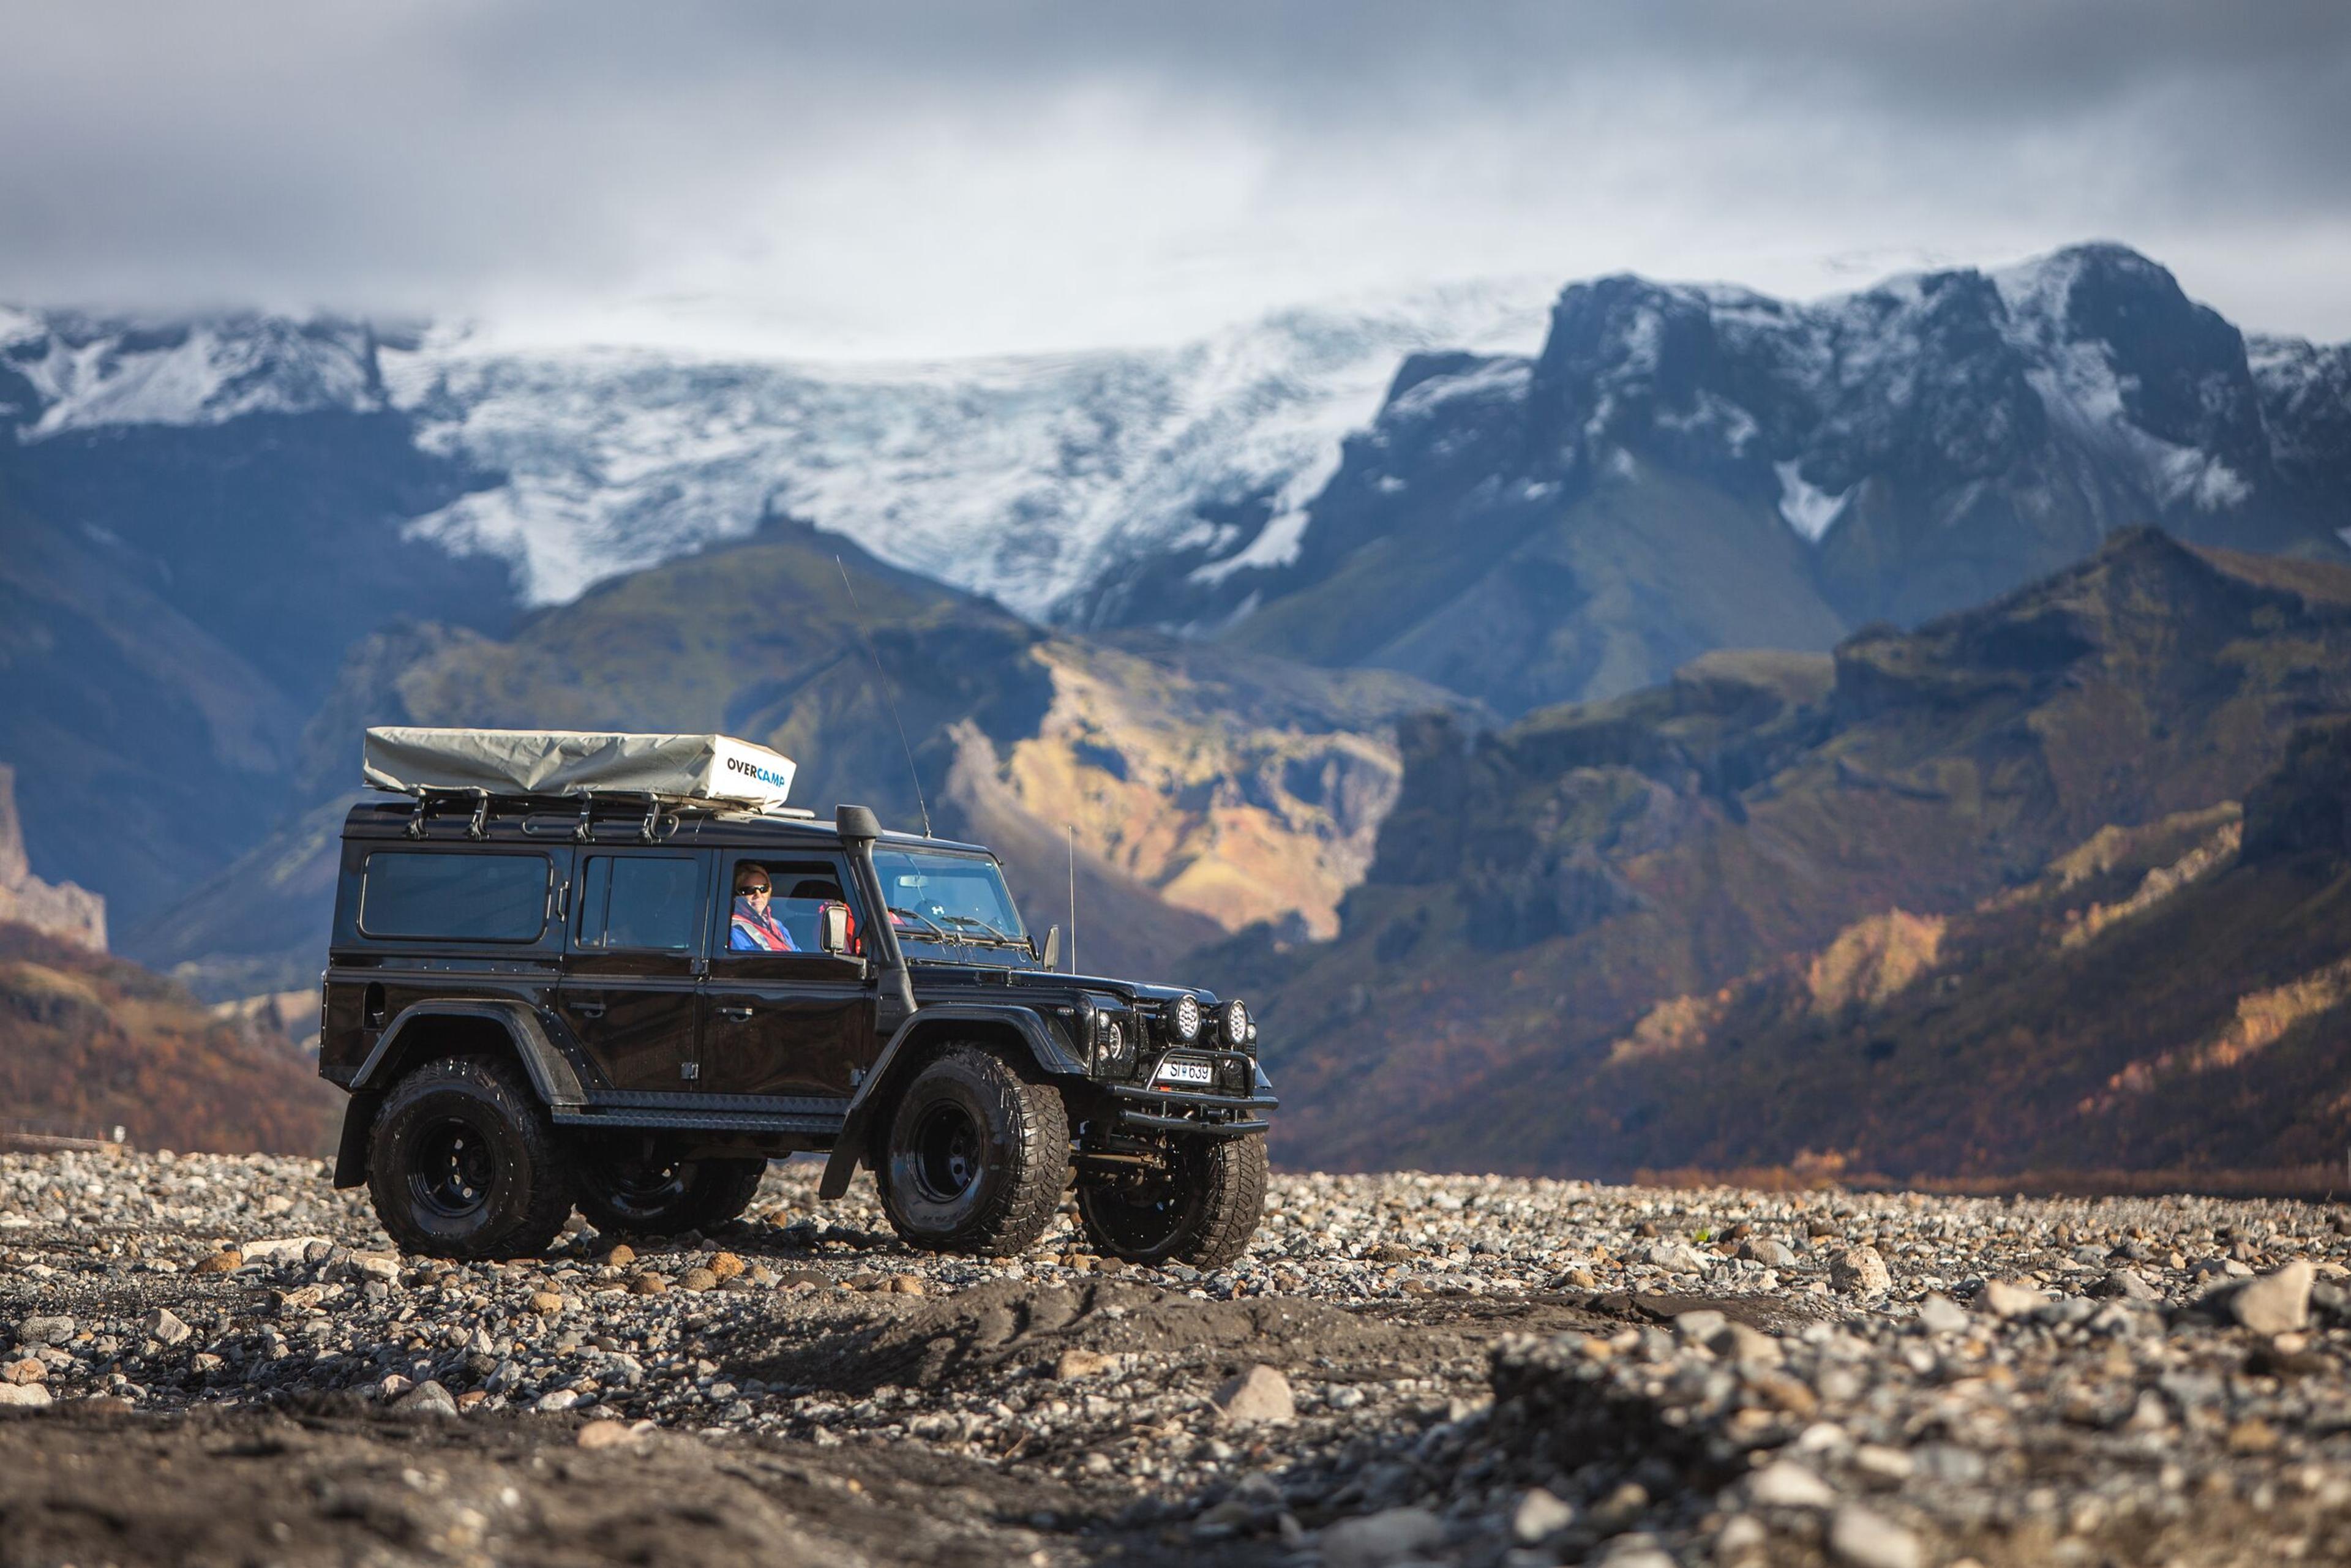 A rugged off-road vehicle equipped with a roof rack travels across a rocky landscape with colorful autumn hills and snow-capped mountains in the background.